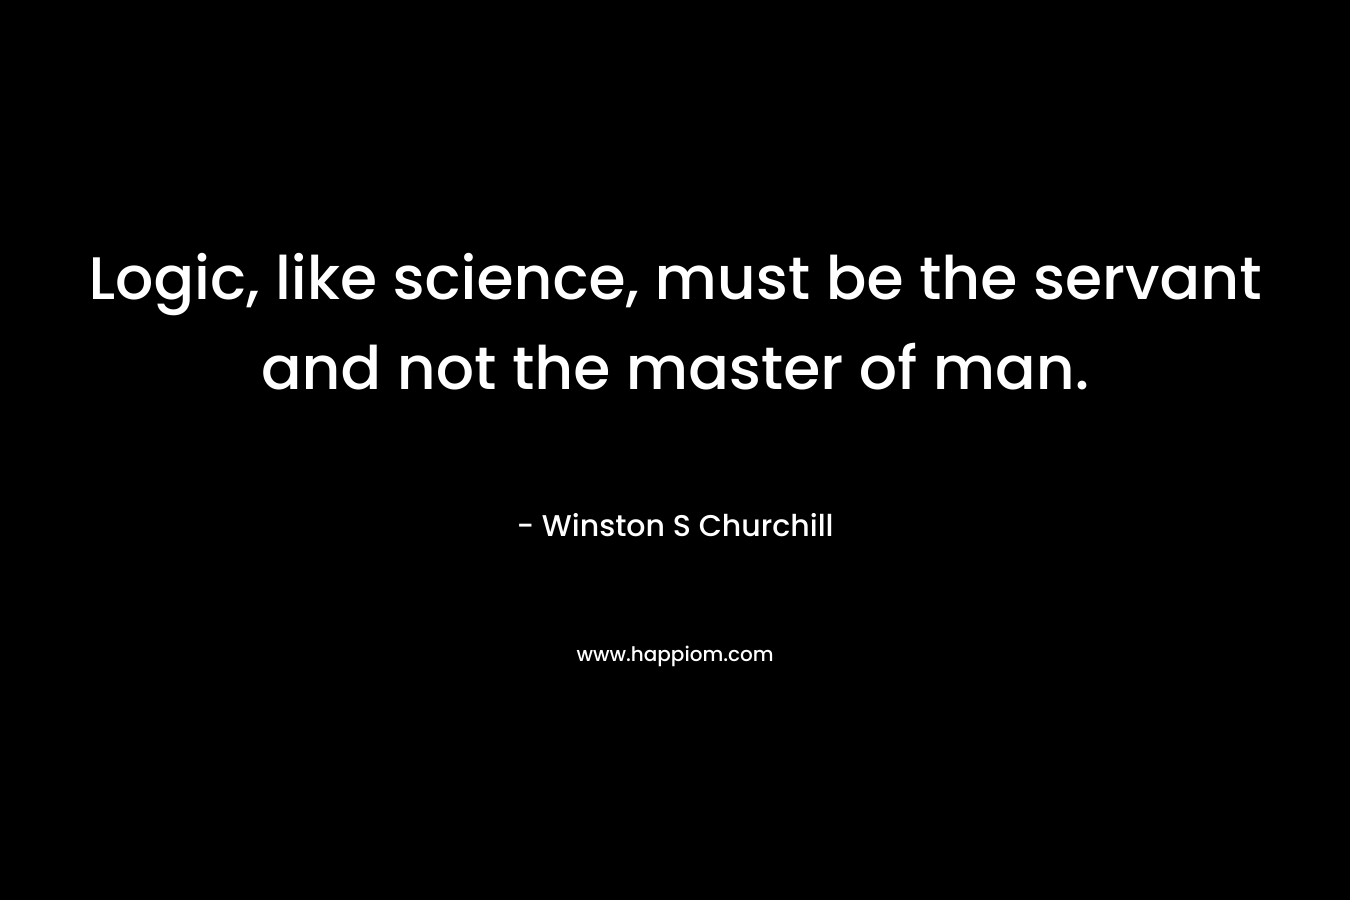 Logic, like science, must be the servant and not the master of man.